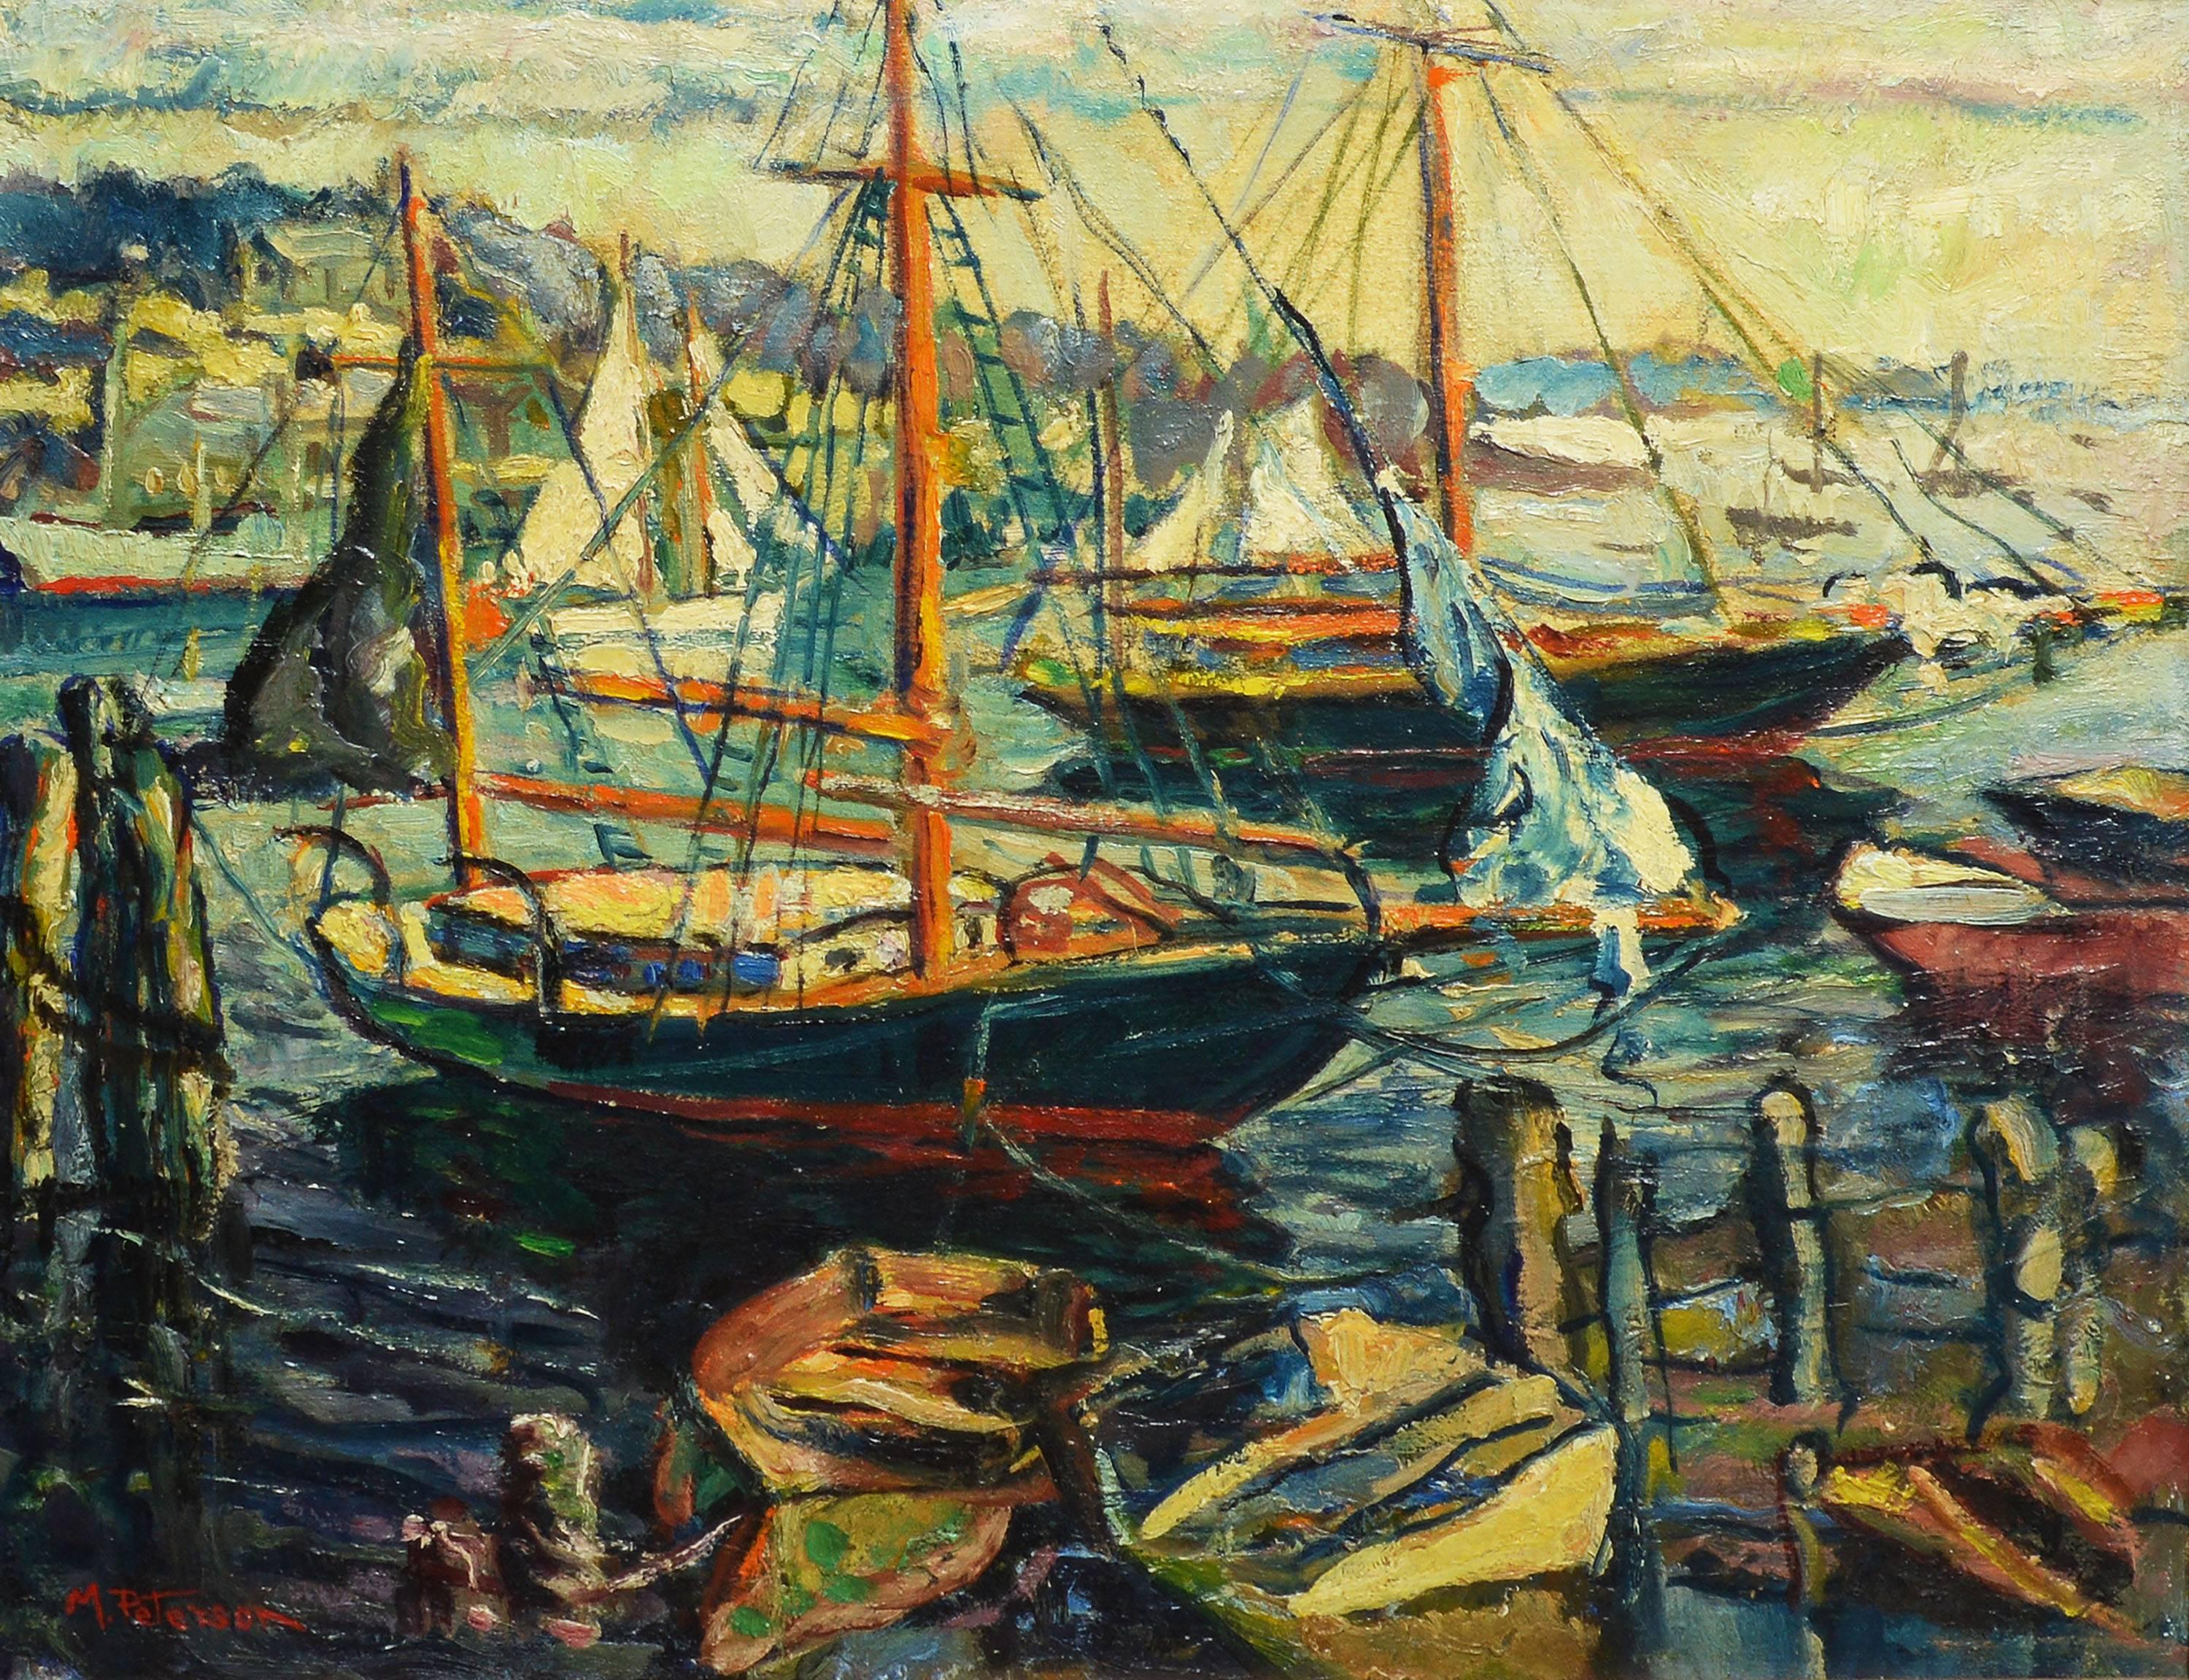 Bustling New England Harbor View - Impressionist Painting by Unknown